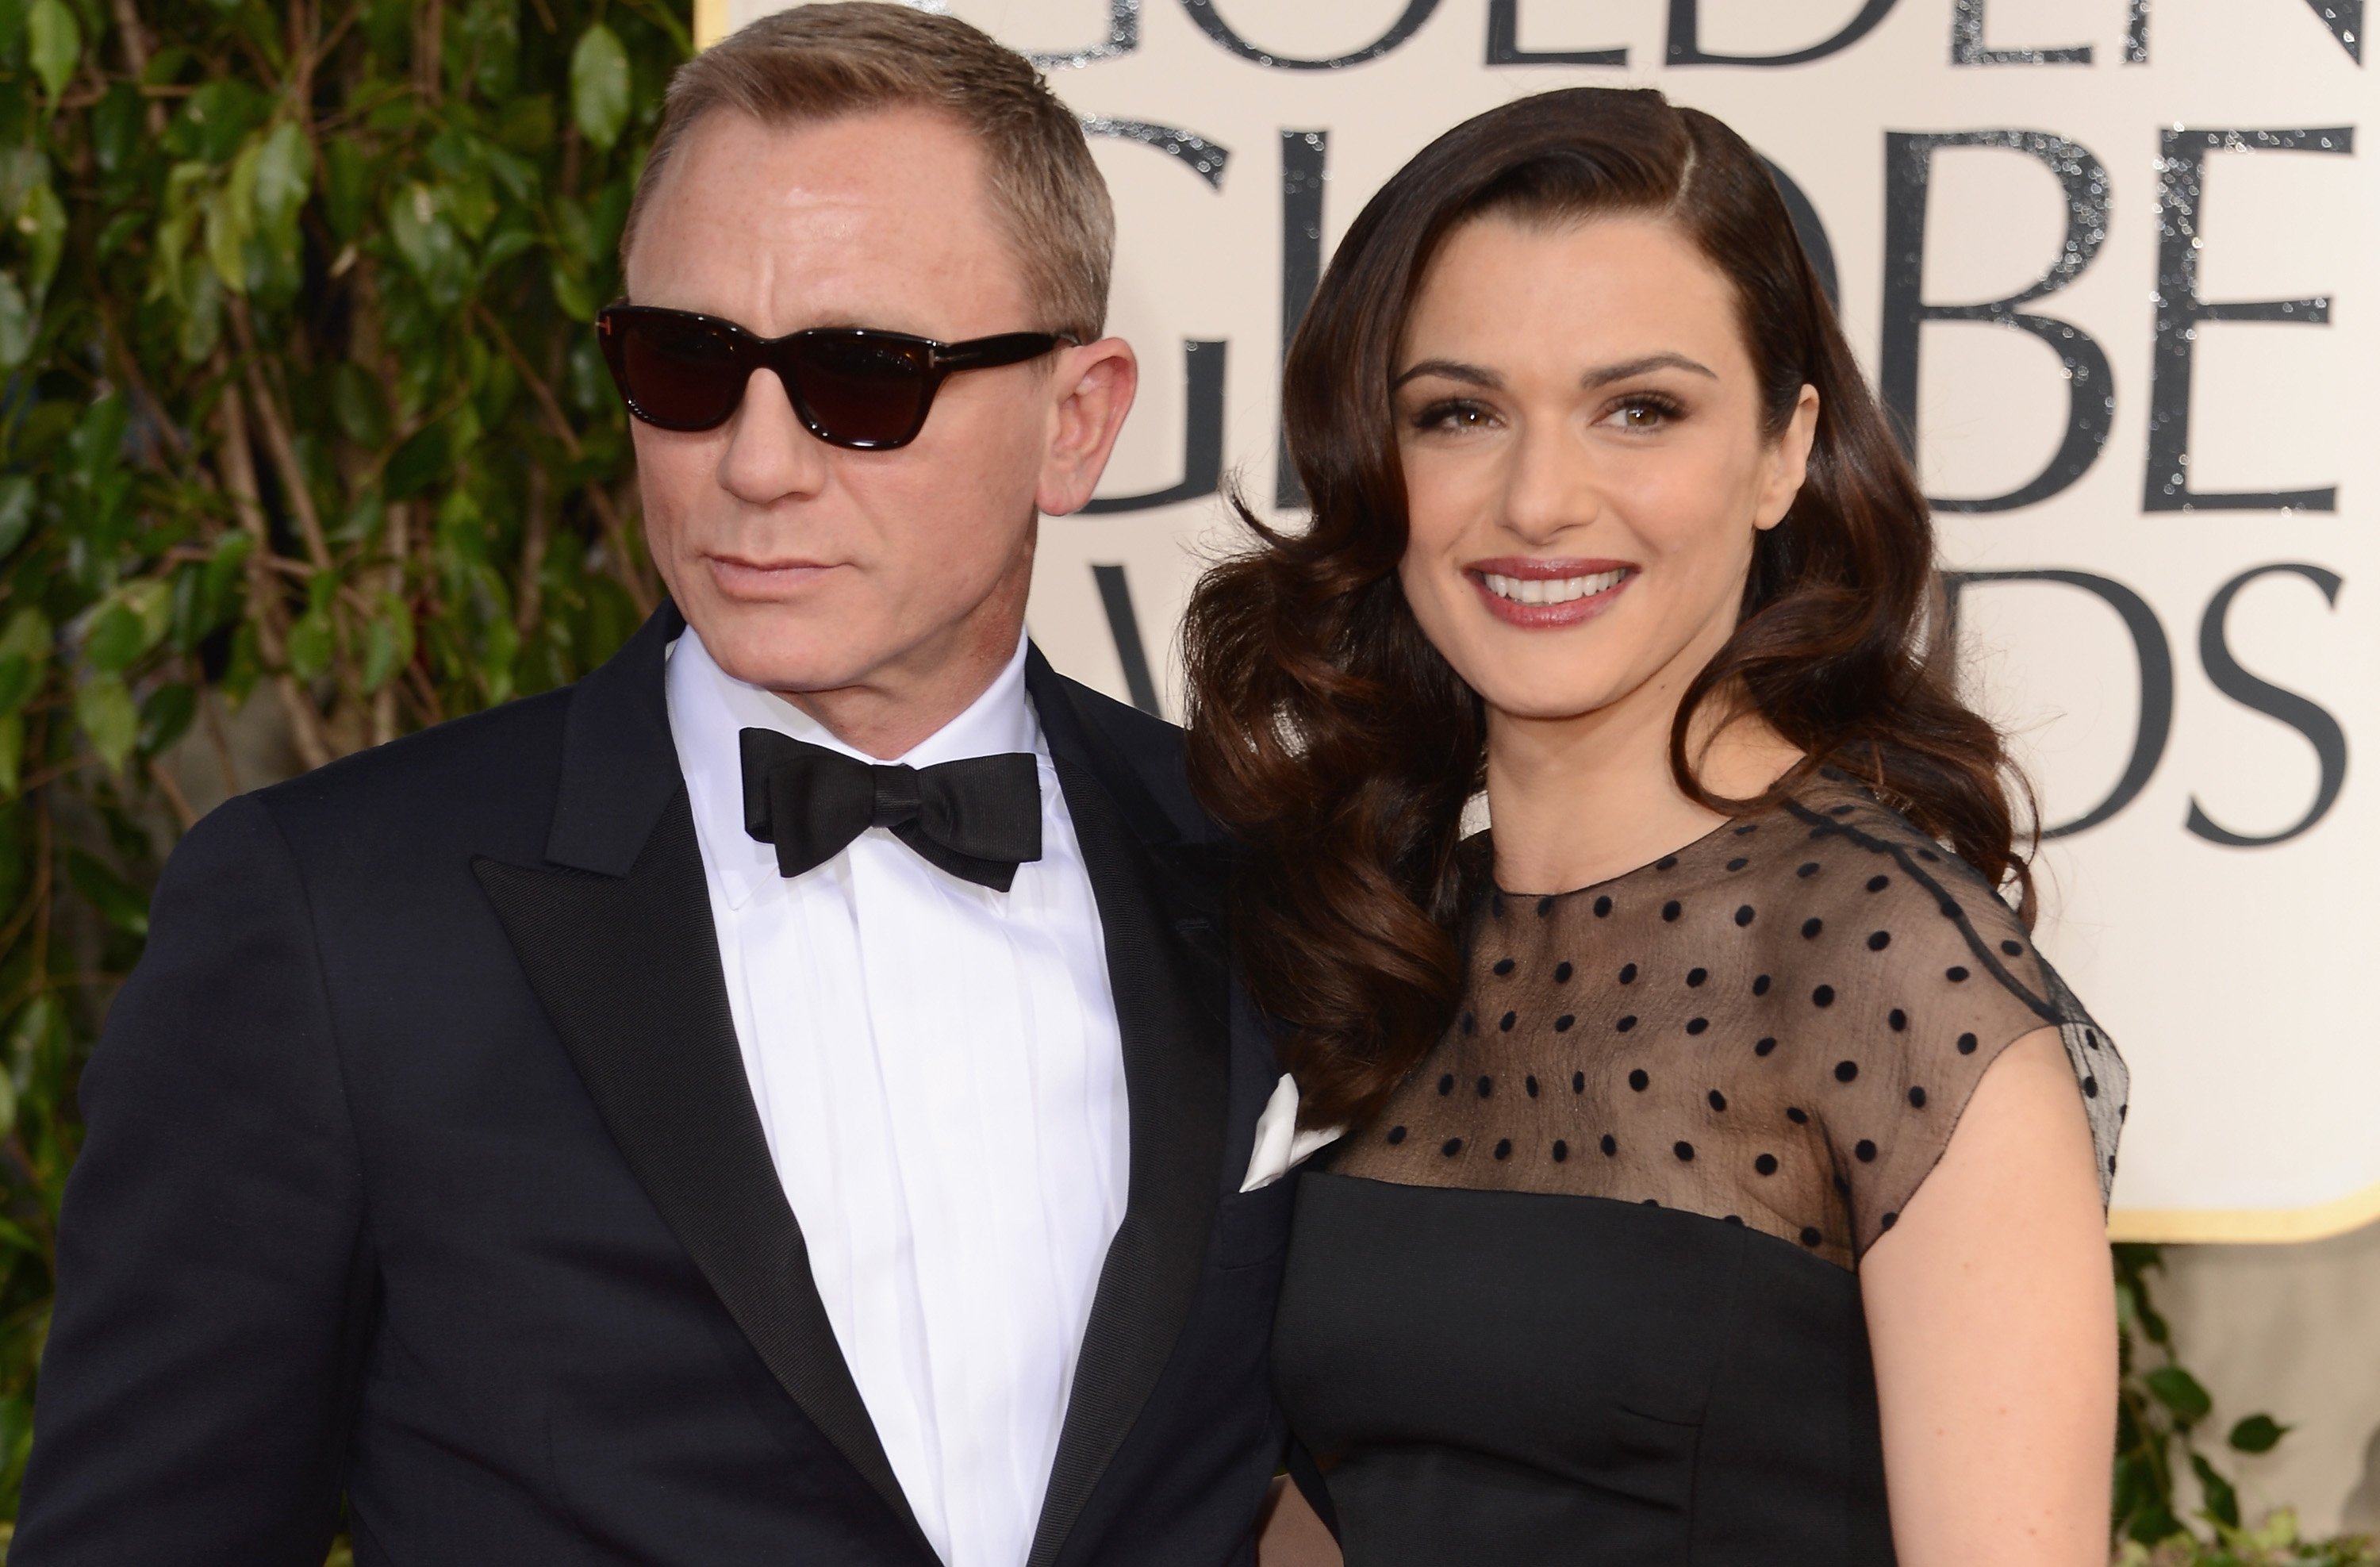 Actors Daniel Craig and Rachel Weisz arrive at the 70th Annual Golden Globe Awards held at The Beverly Hilton Hotel on January 13, 2013 in Beverly Hills, California. | Source: Getty Images